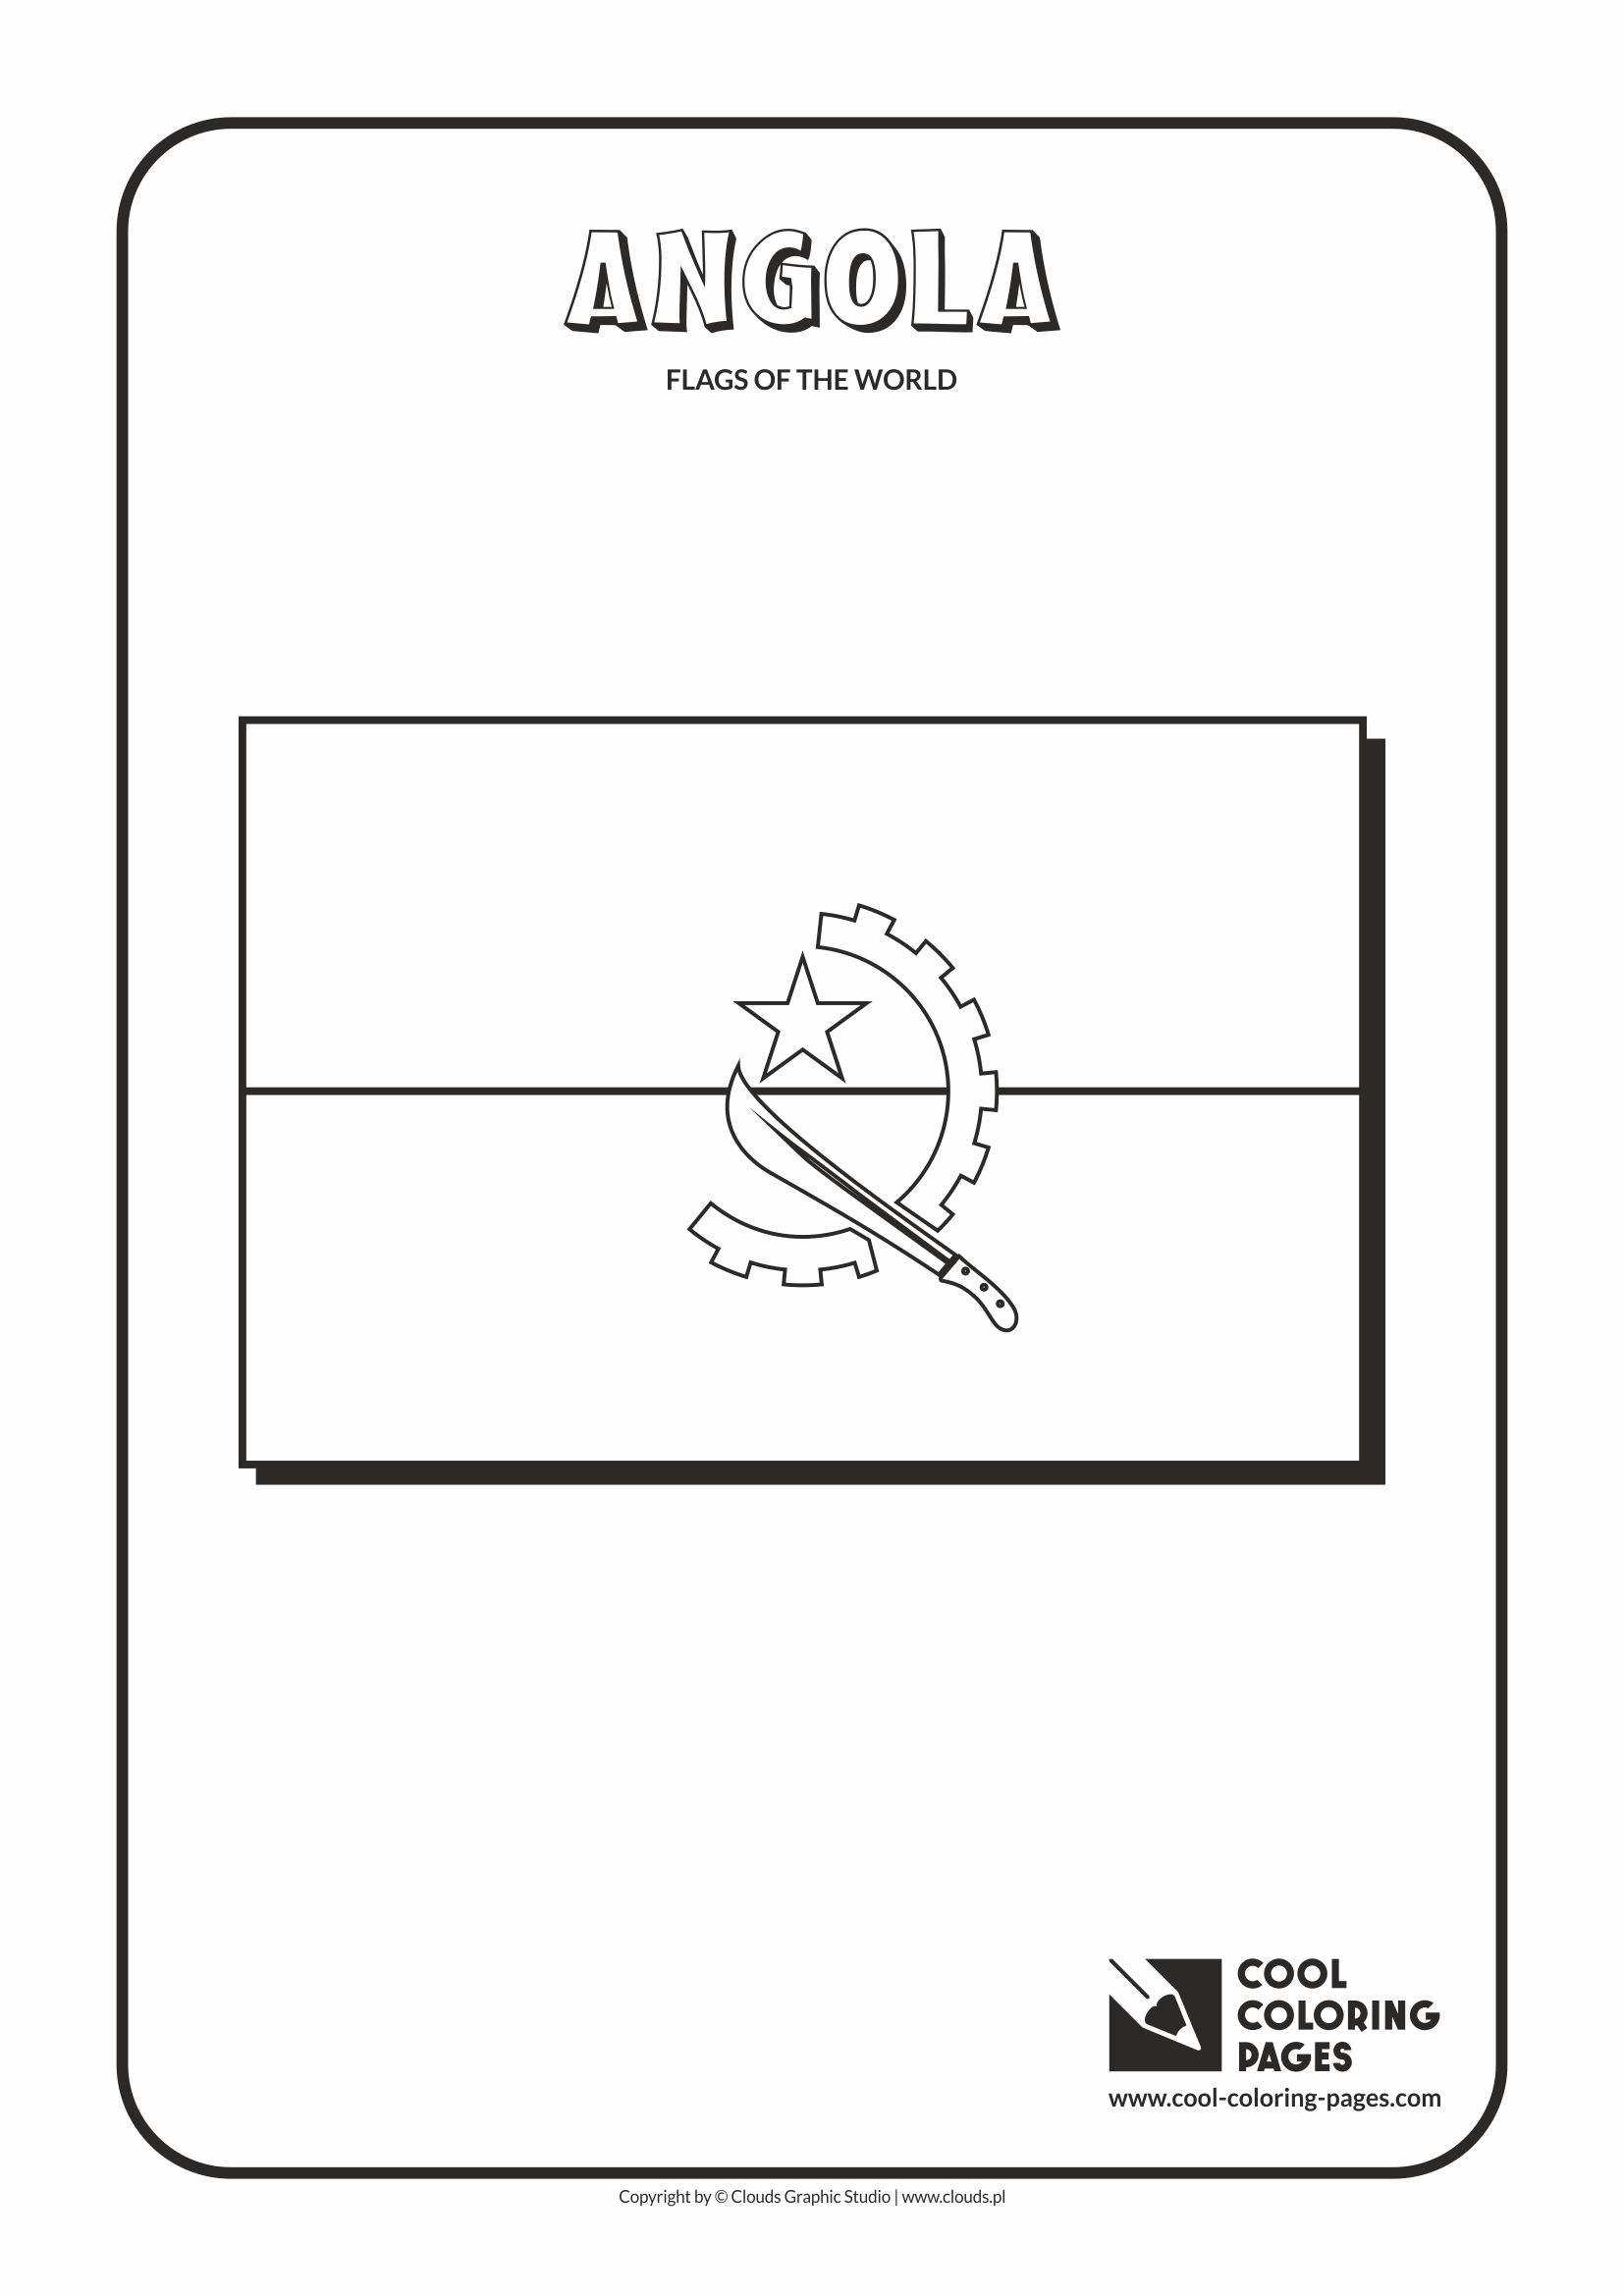 Cool Coloring Pages - Flags of the world / Angola flag